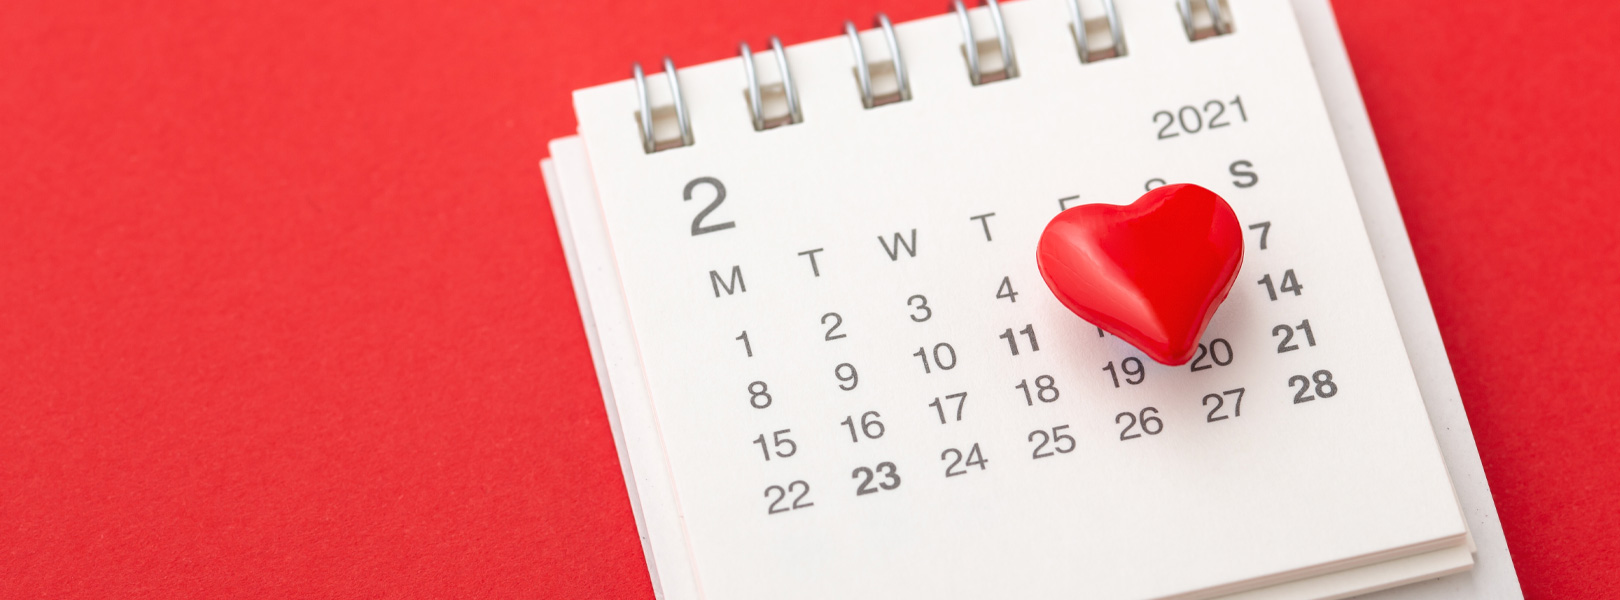 February 2021 calendar with red heart